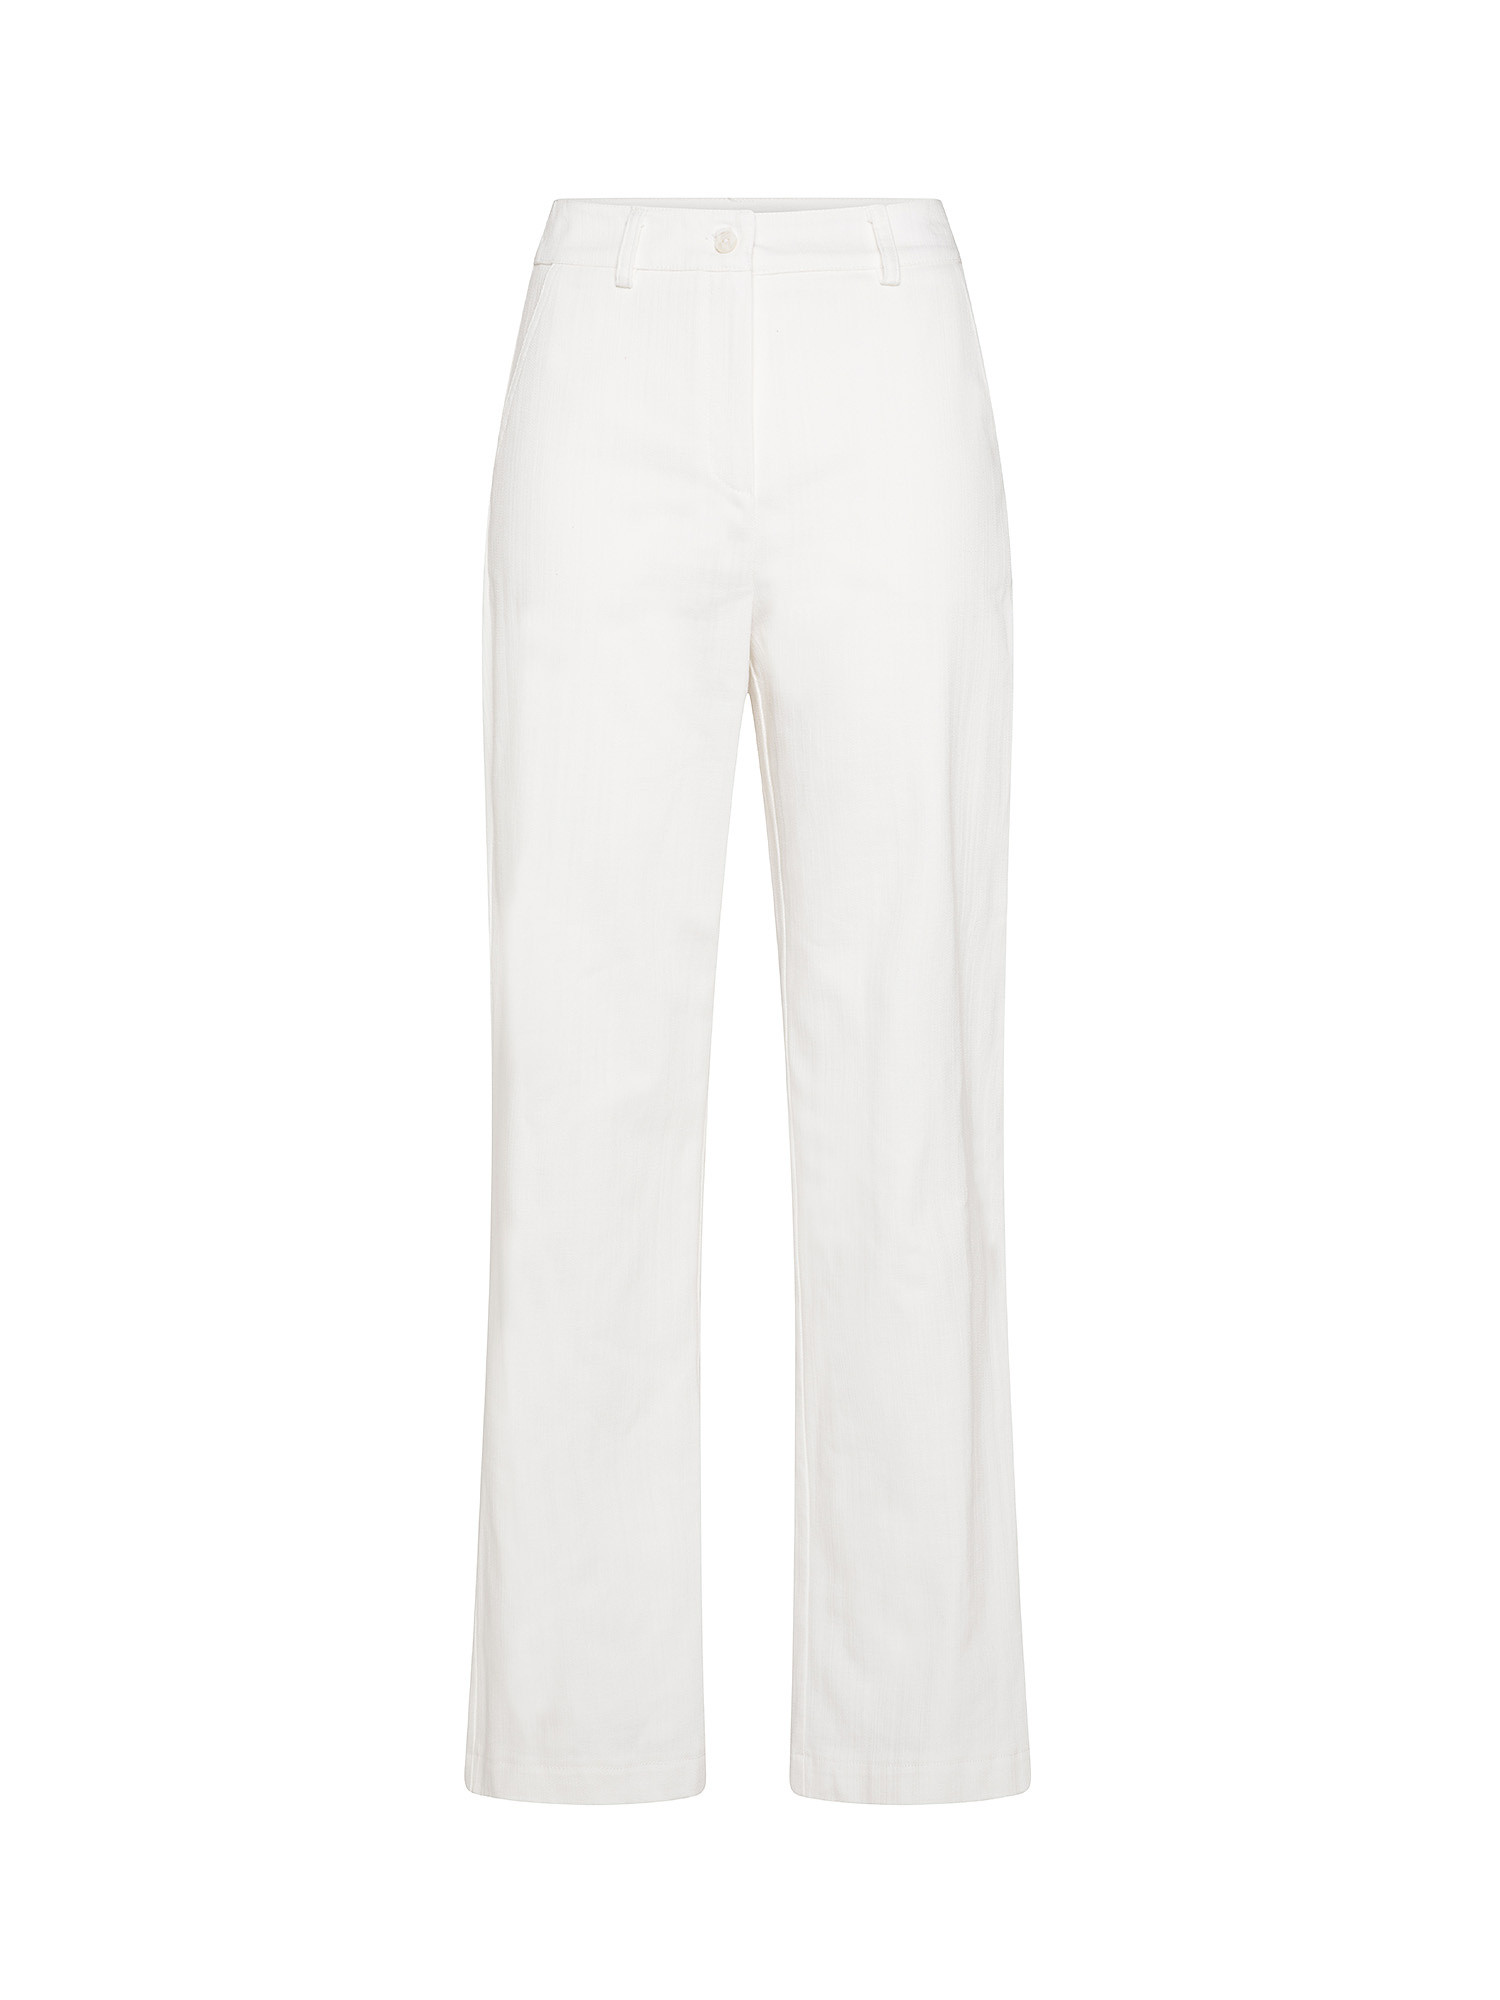 Trousers jeans, White, large image number 0